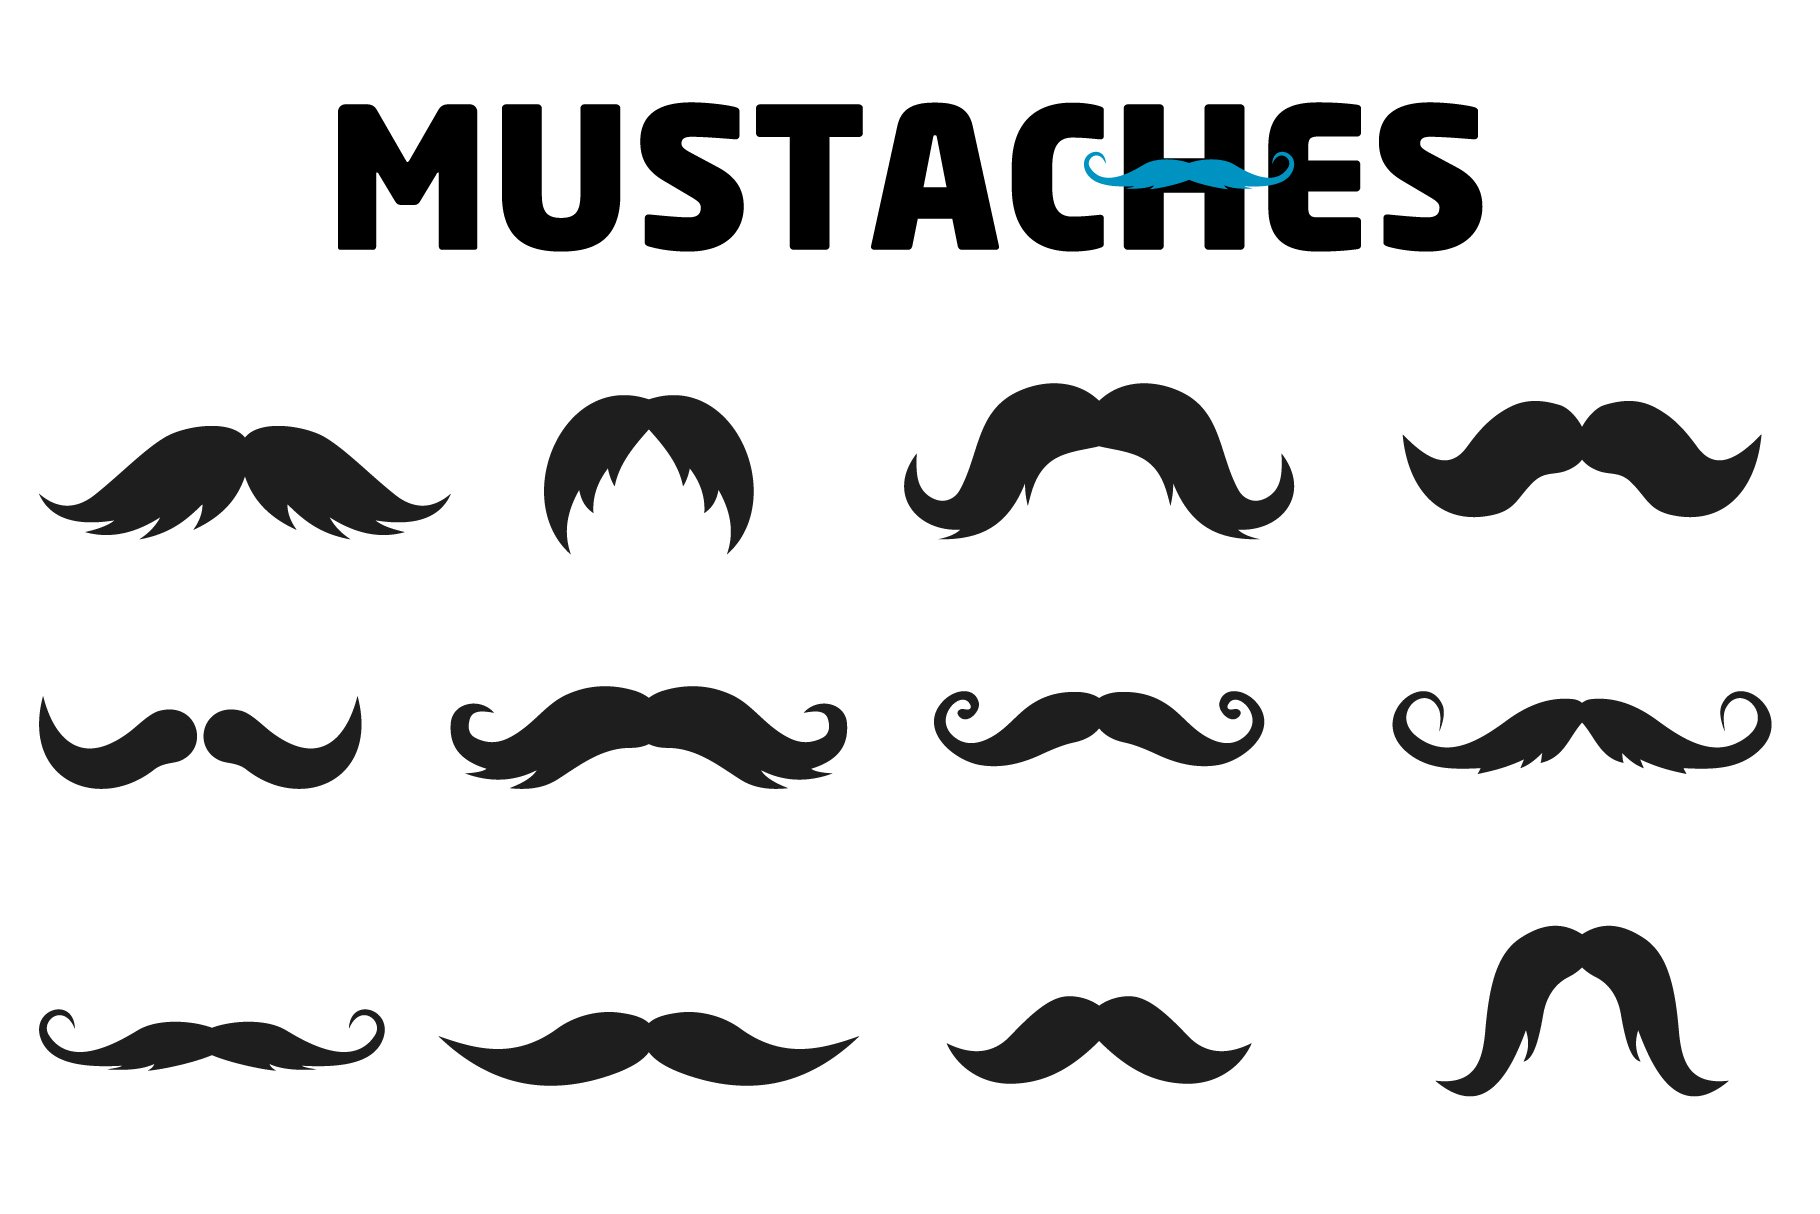 12 Mustaches .ai cover image.